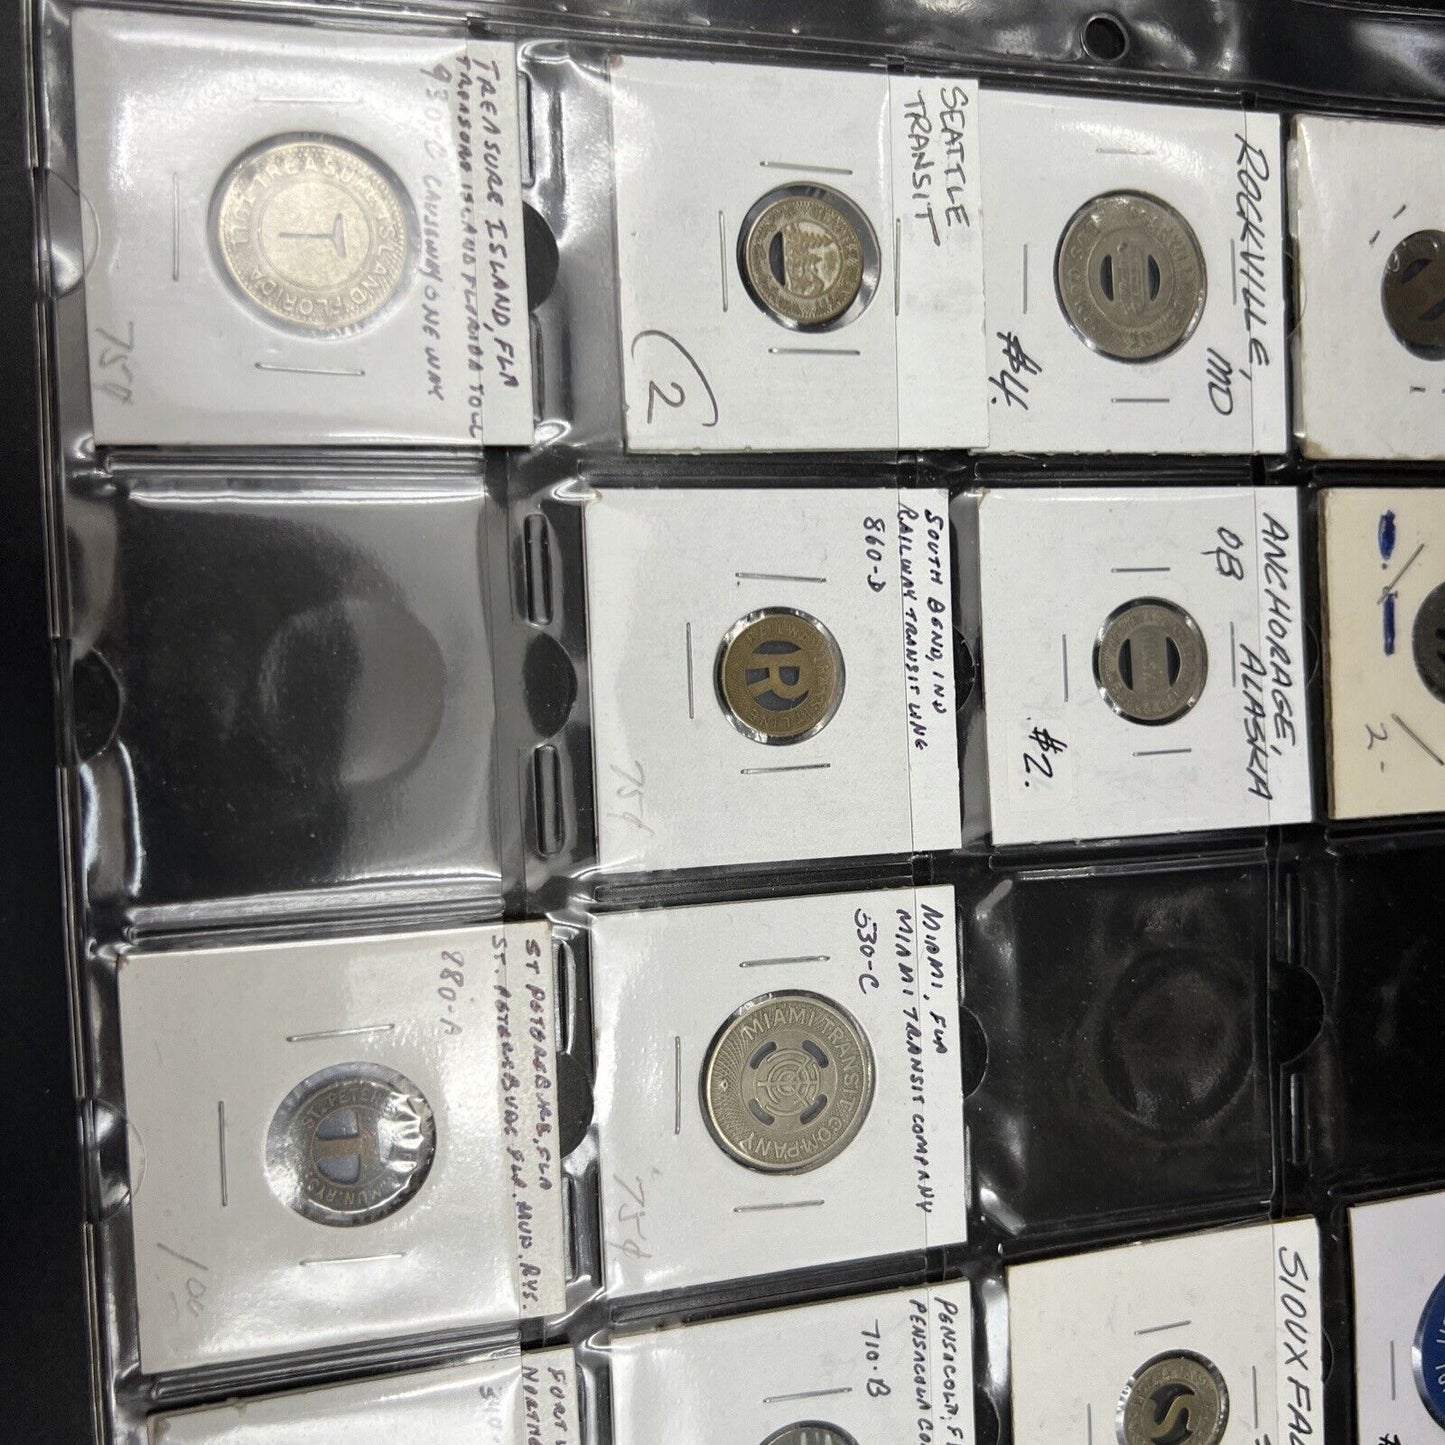 Lot of 15 United States Transit Tokens Coin Collection #12